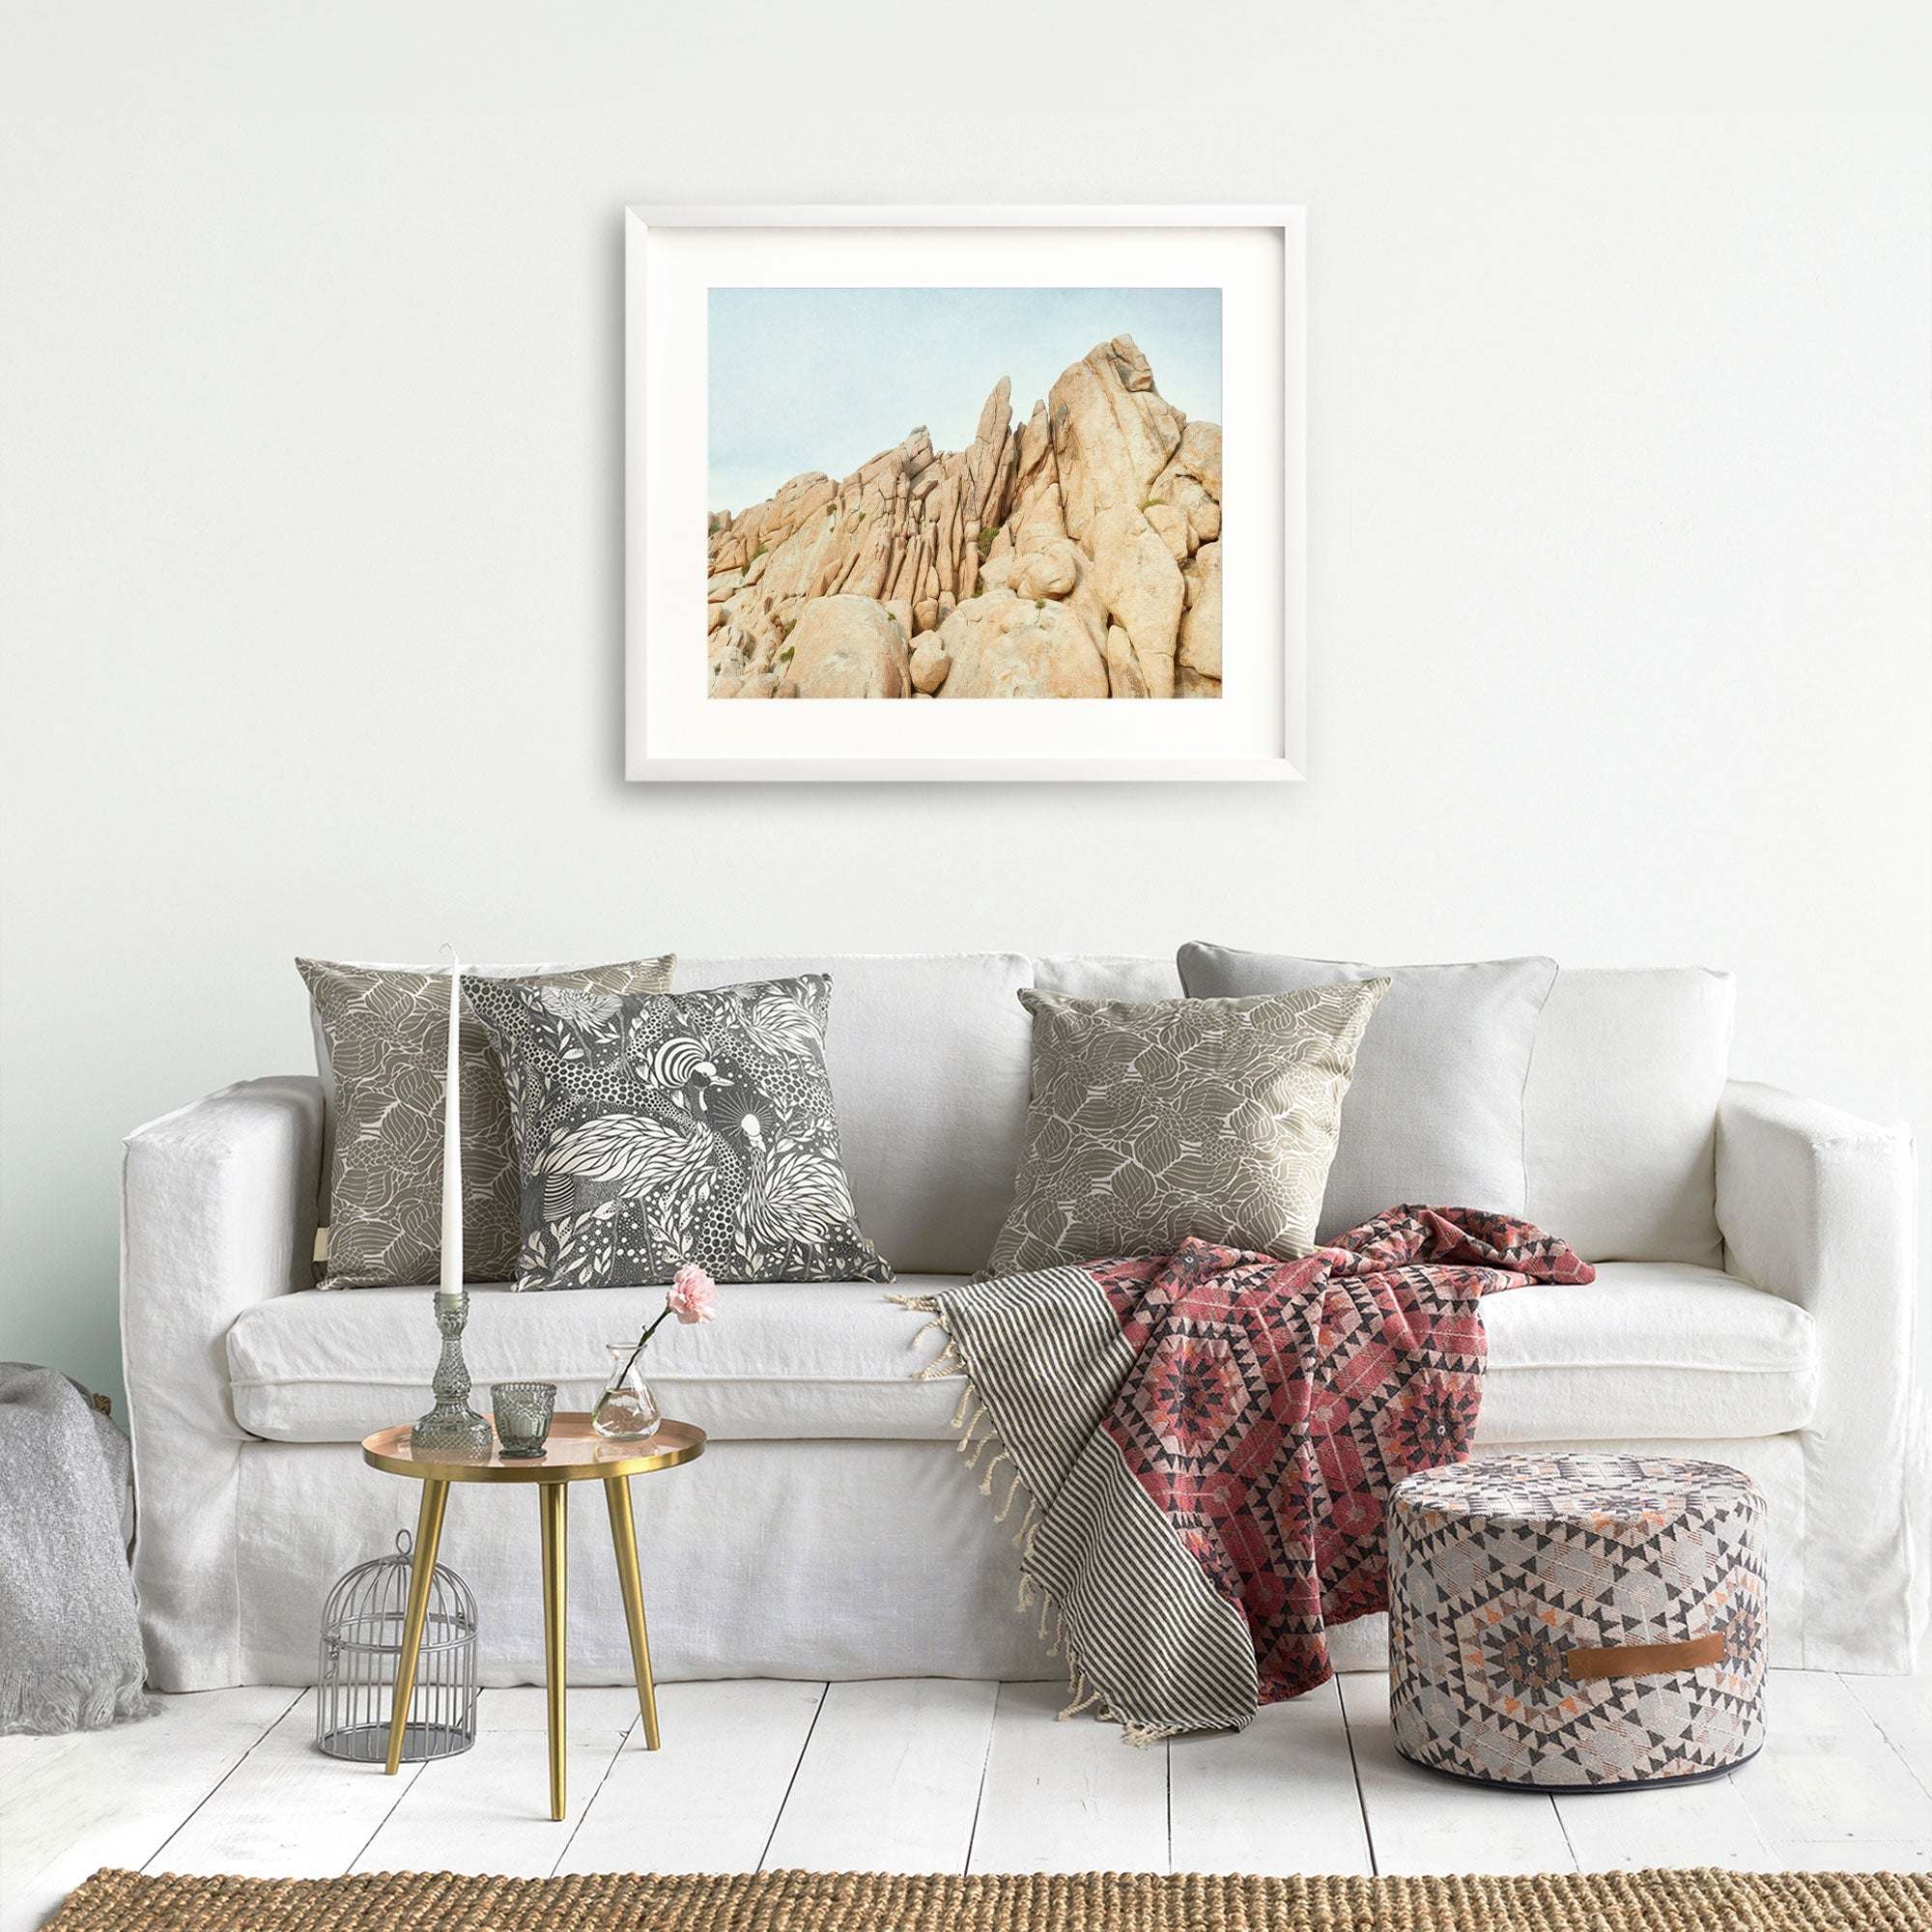 A cozy living room featuring a white sofa adorned with decorative gray pillows, a red patterned throw blanket, a small round table with a plant, a birdcage, and unframed prints of Offley Green's Joshua Tree Print, 'Joshua Rocks'.